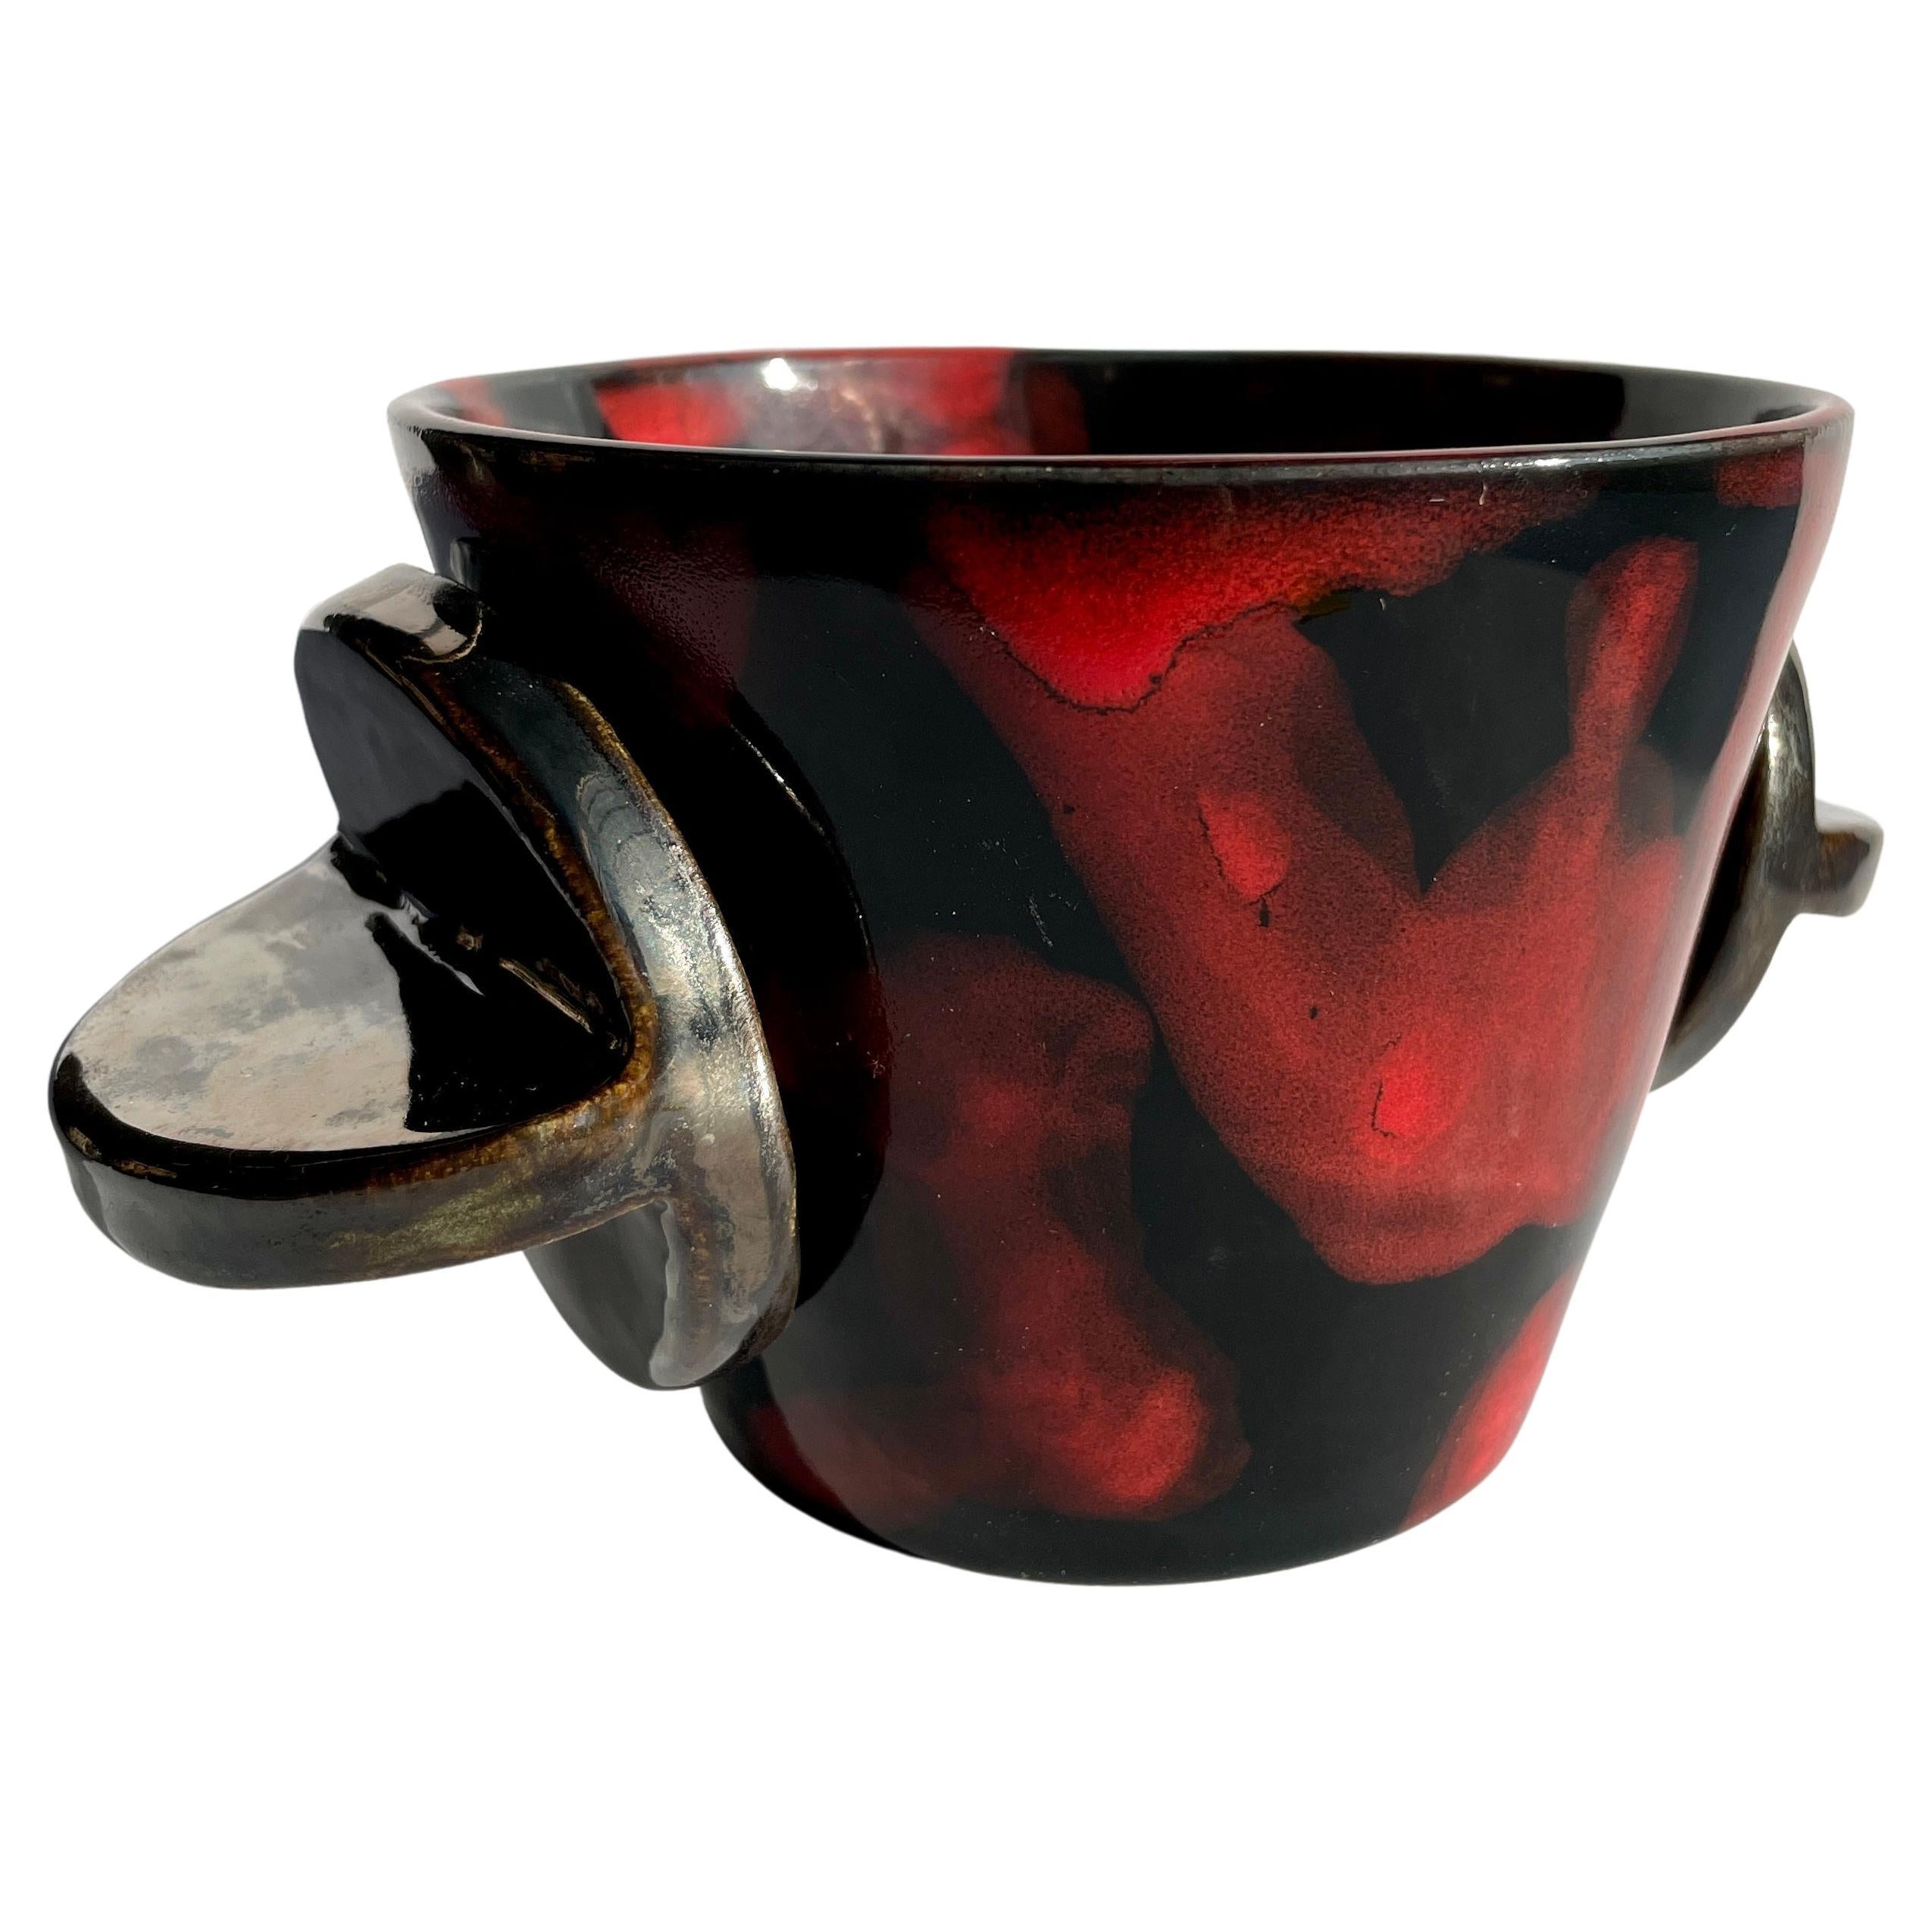 The Tab V, shown here in diffused China Red / Raven and broken silver, the food safe vessel for your favorite beverage of choice, entertaining, or as a decorative object or objet d'art. Versatile, sustainable and one of kind, made of recycled